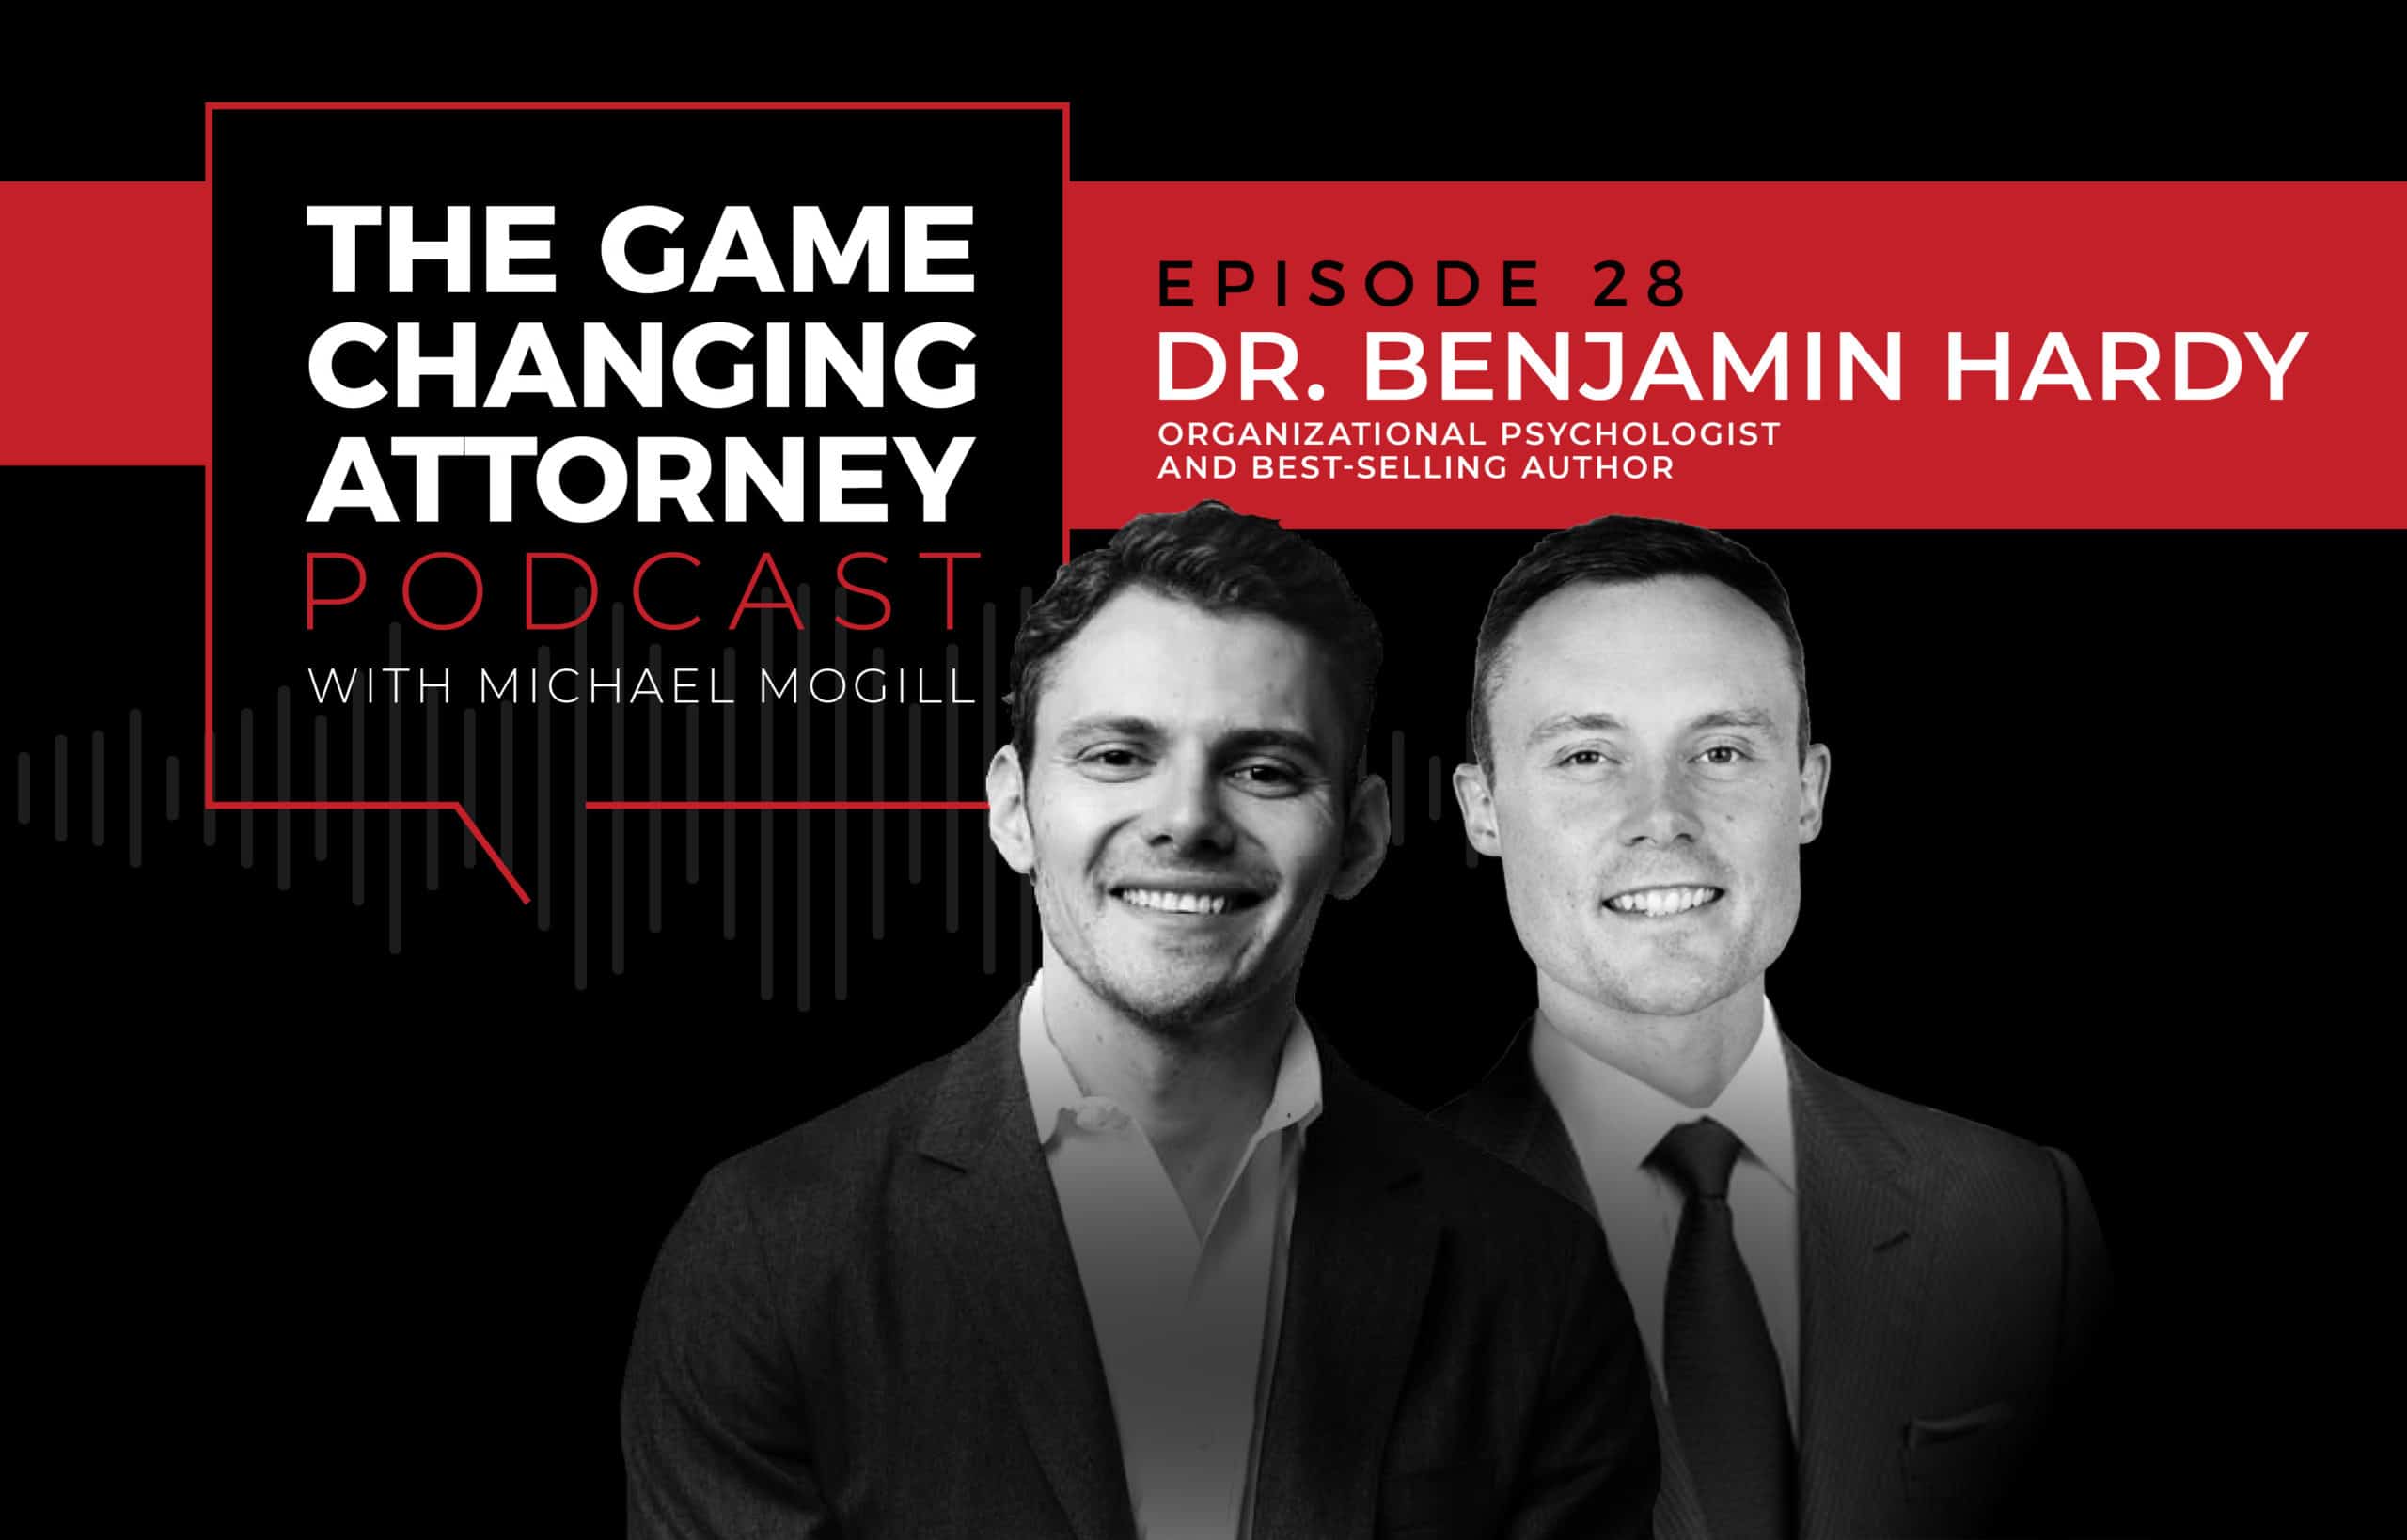 Ben Hardy - The Game Changing Attorney Podcast - Mobile